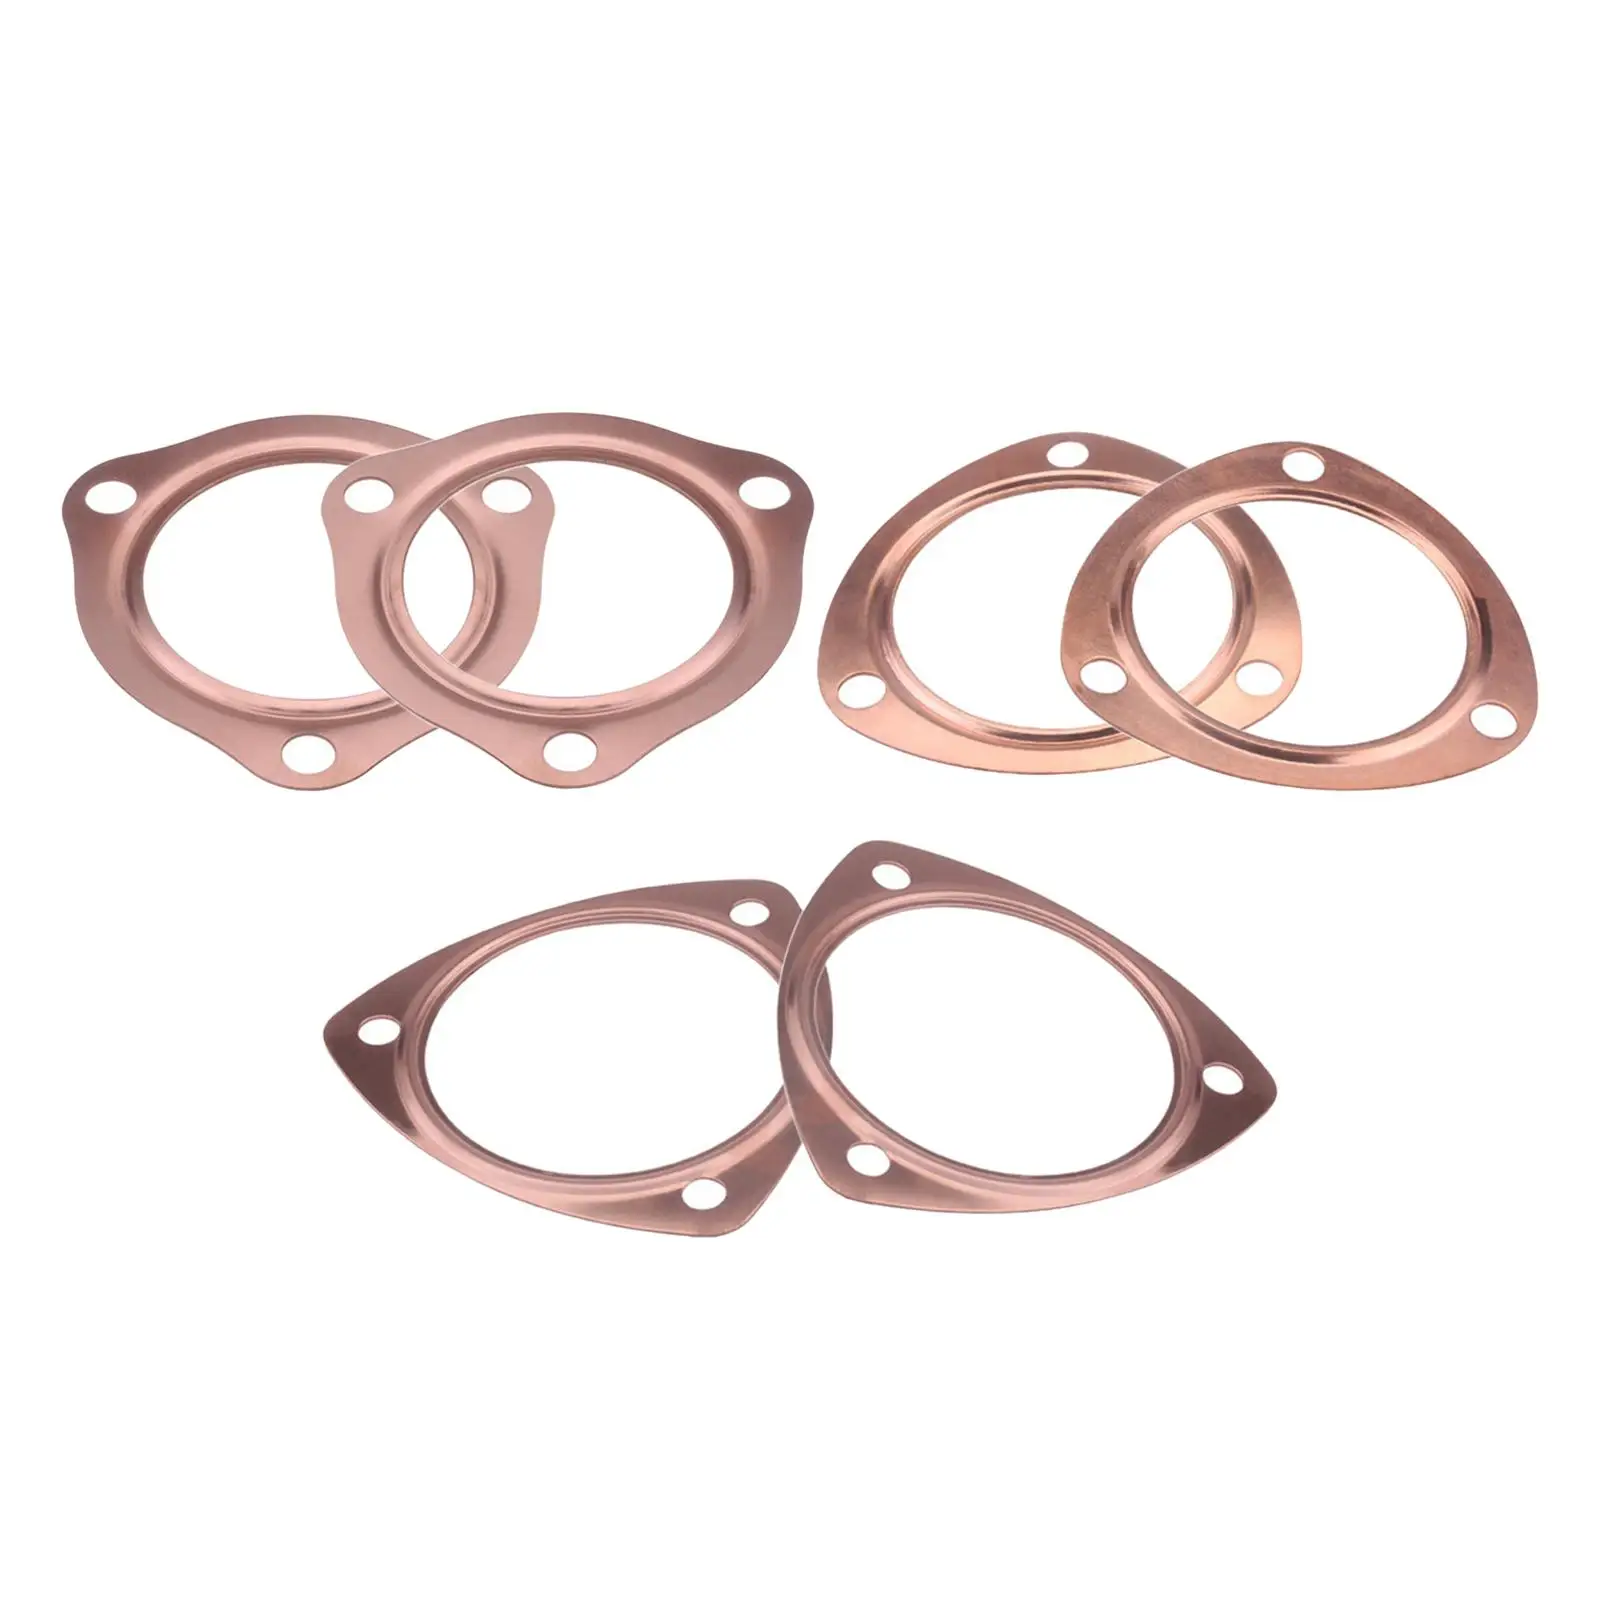 Header Collector Gaskets Colorfast for Sbc Bbc 302 350 454 Accessory